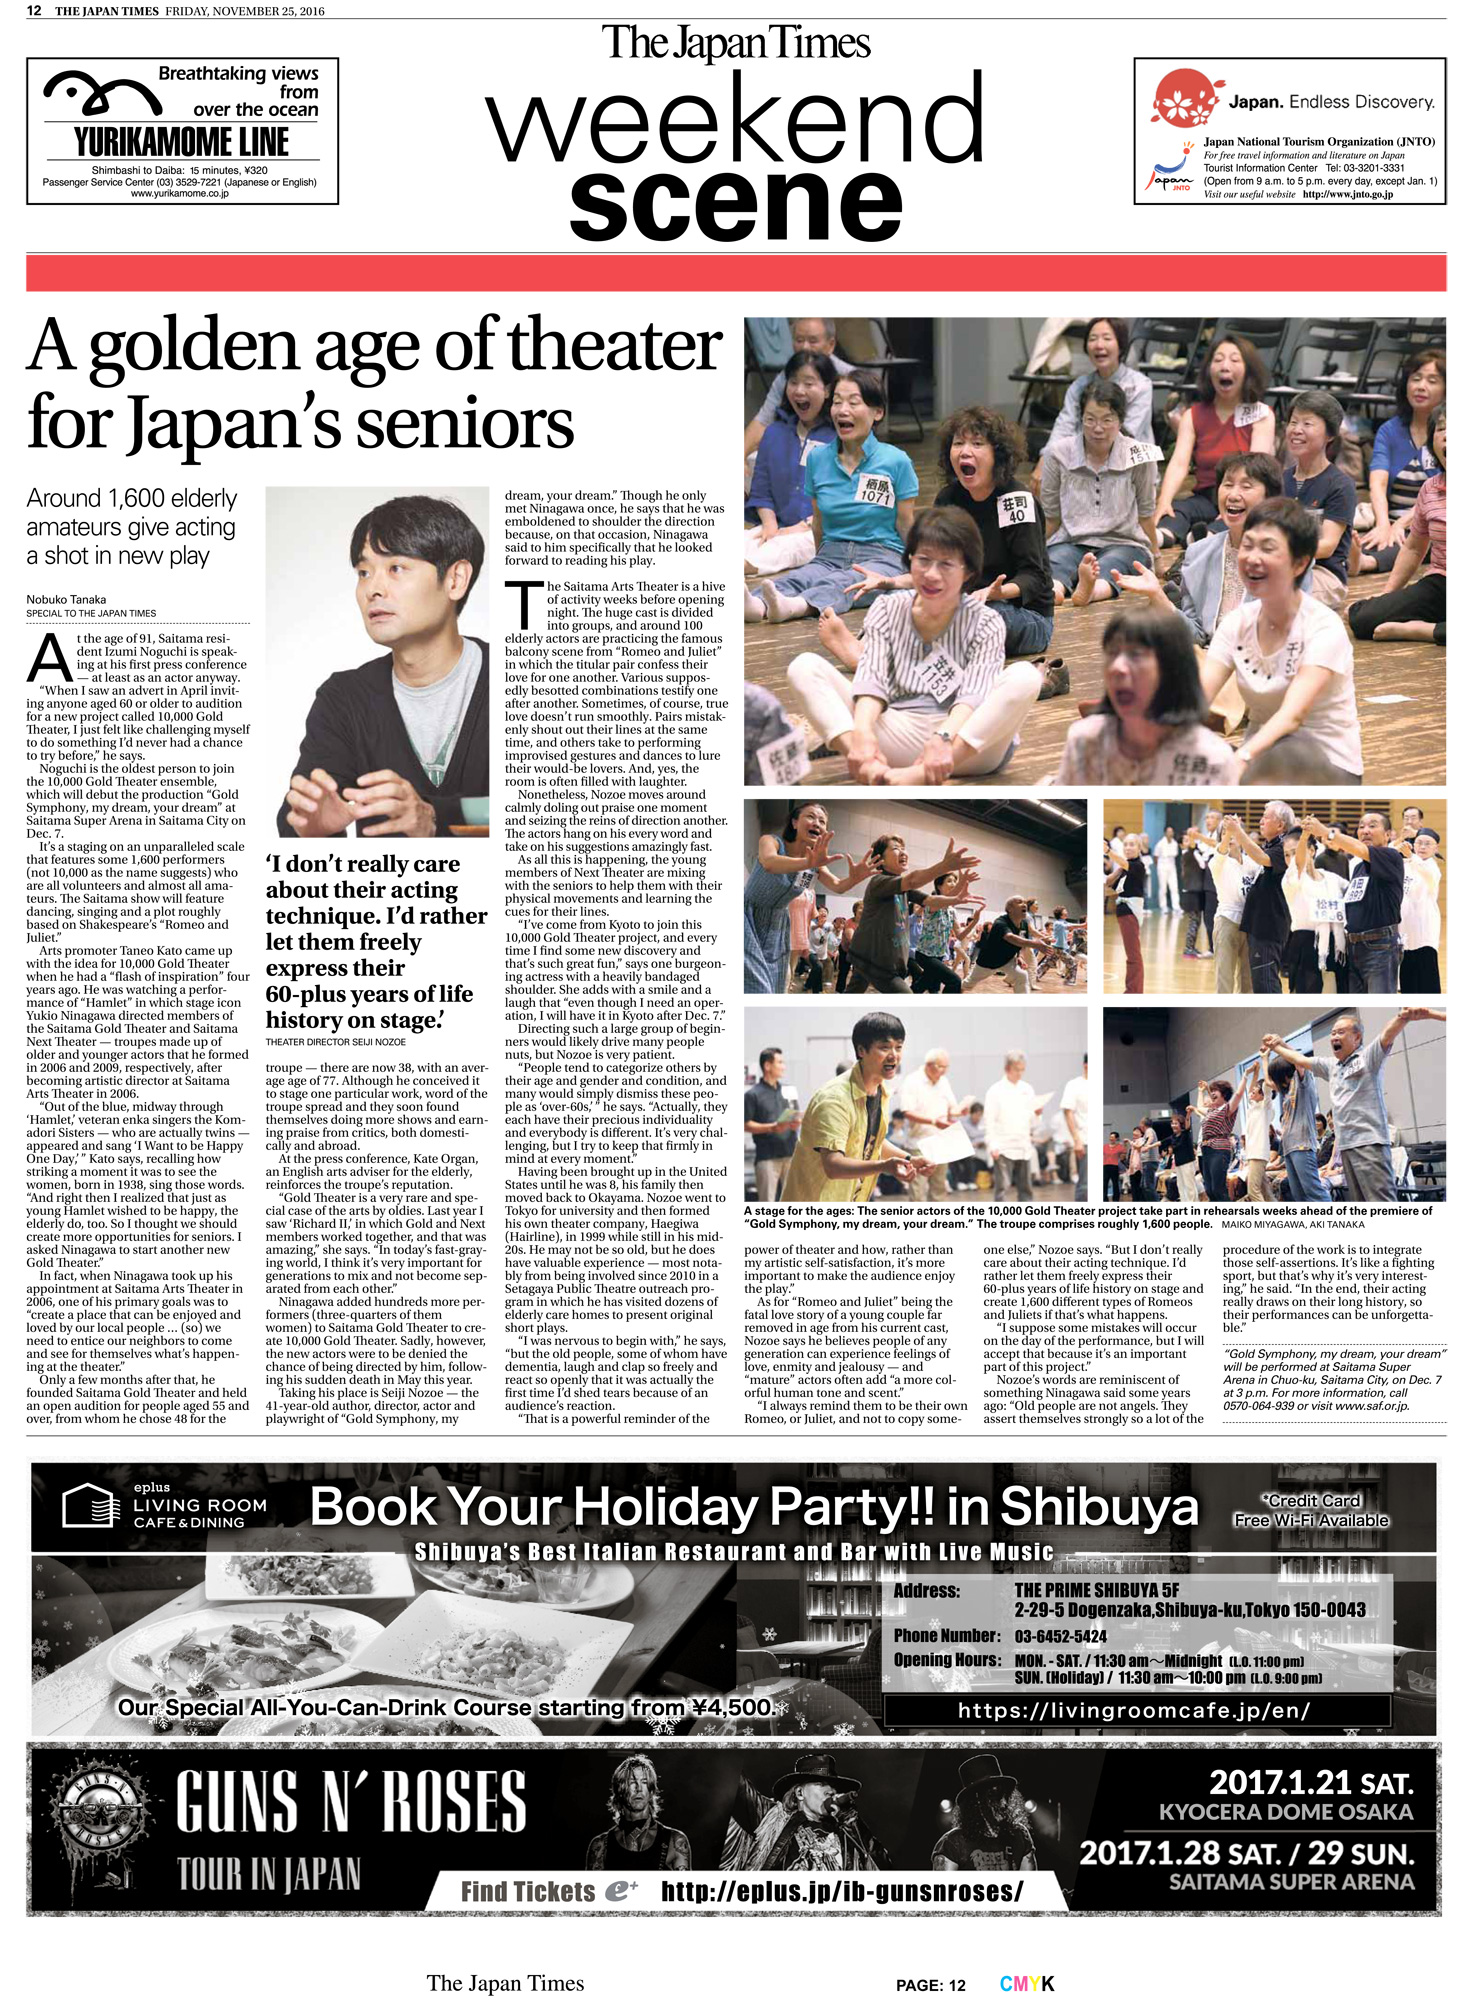 Japan Times Theatre Article 11/25/'16